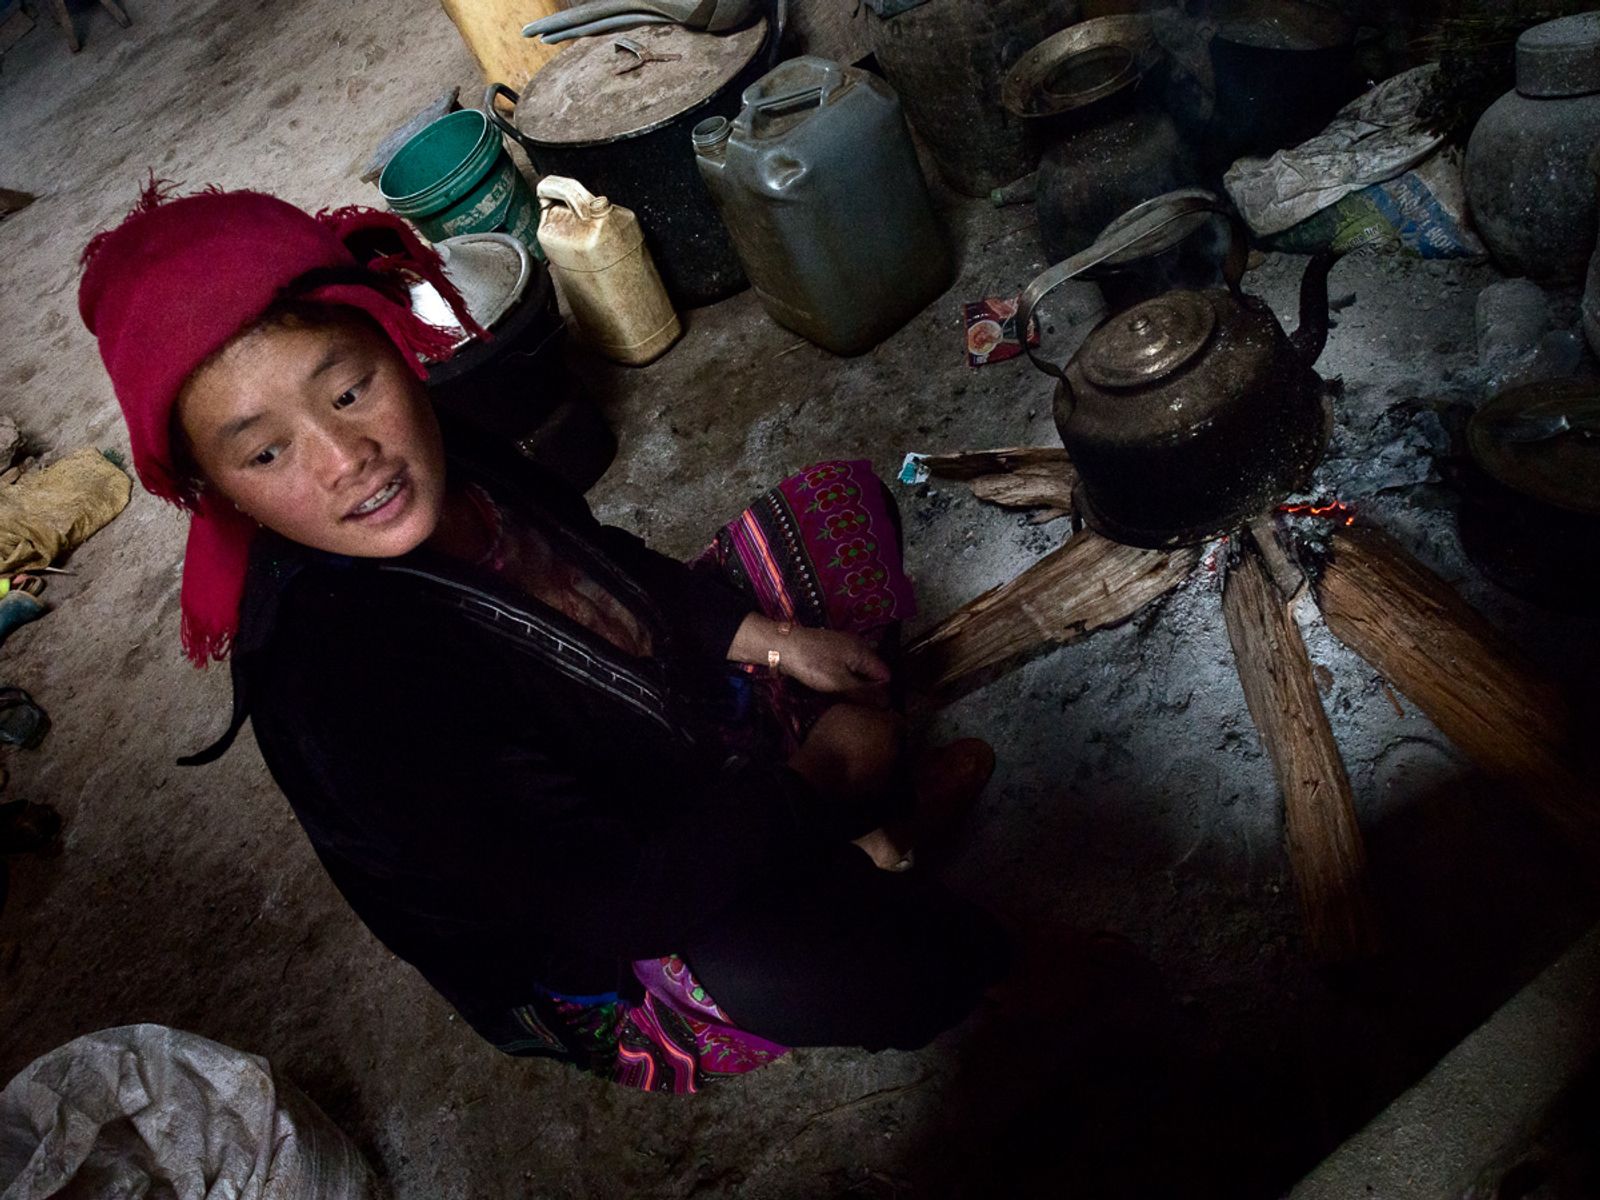 © Tony Corocher - Image from the PORTRAITS OF STRENGTH: Ethnic Women in North Vietnam photography project